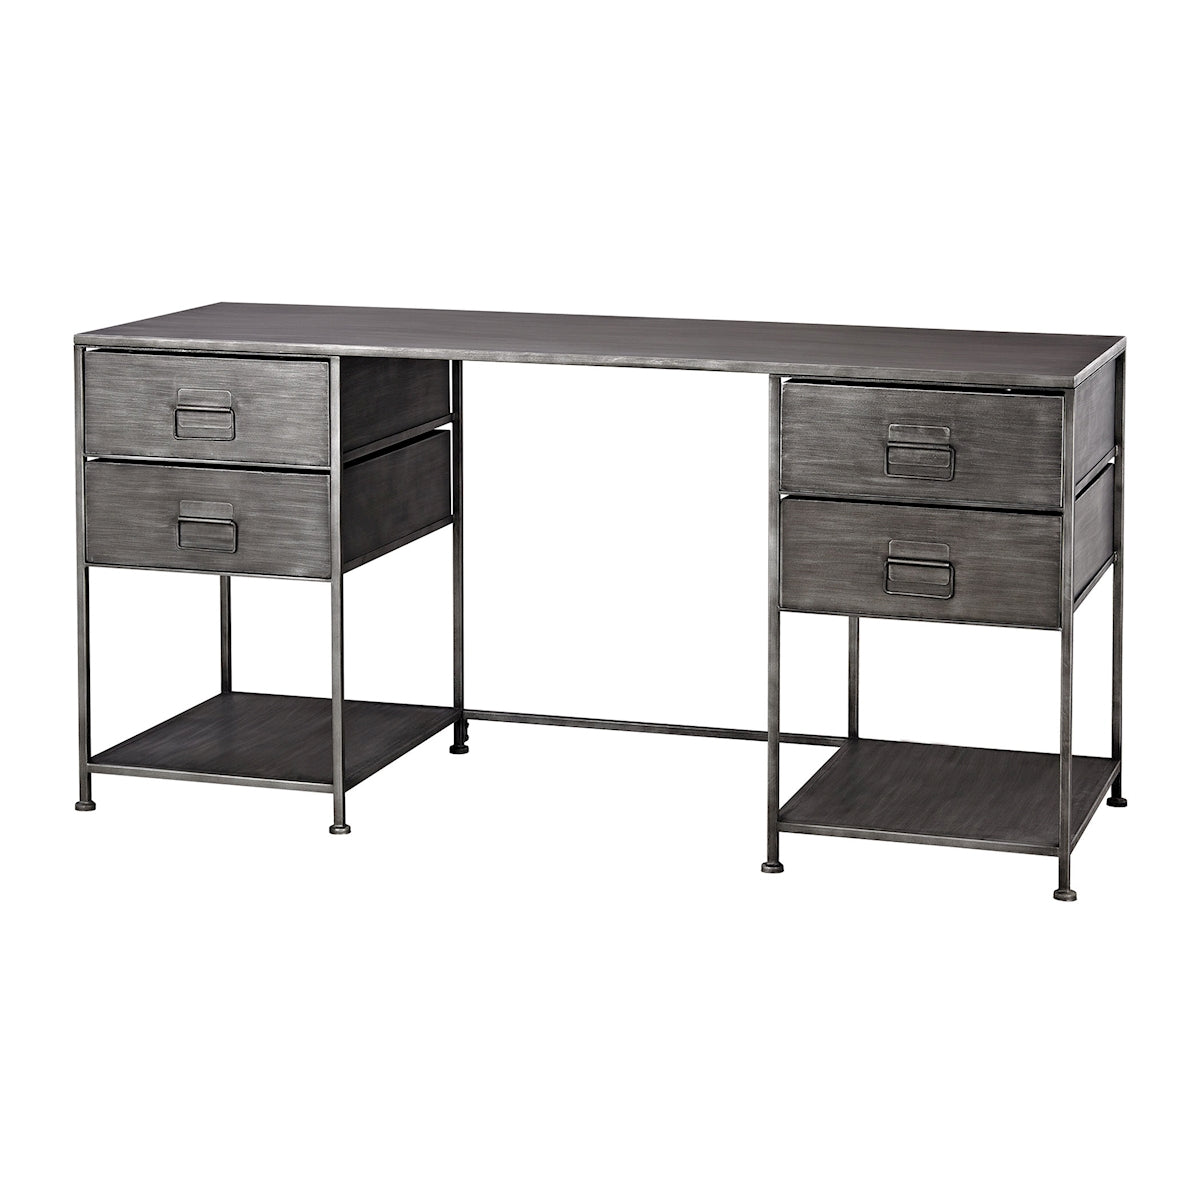 Desk from the Gunthery collection in Graphite finish